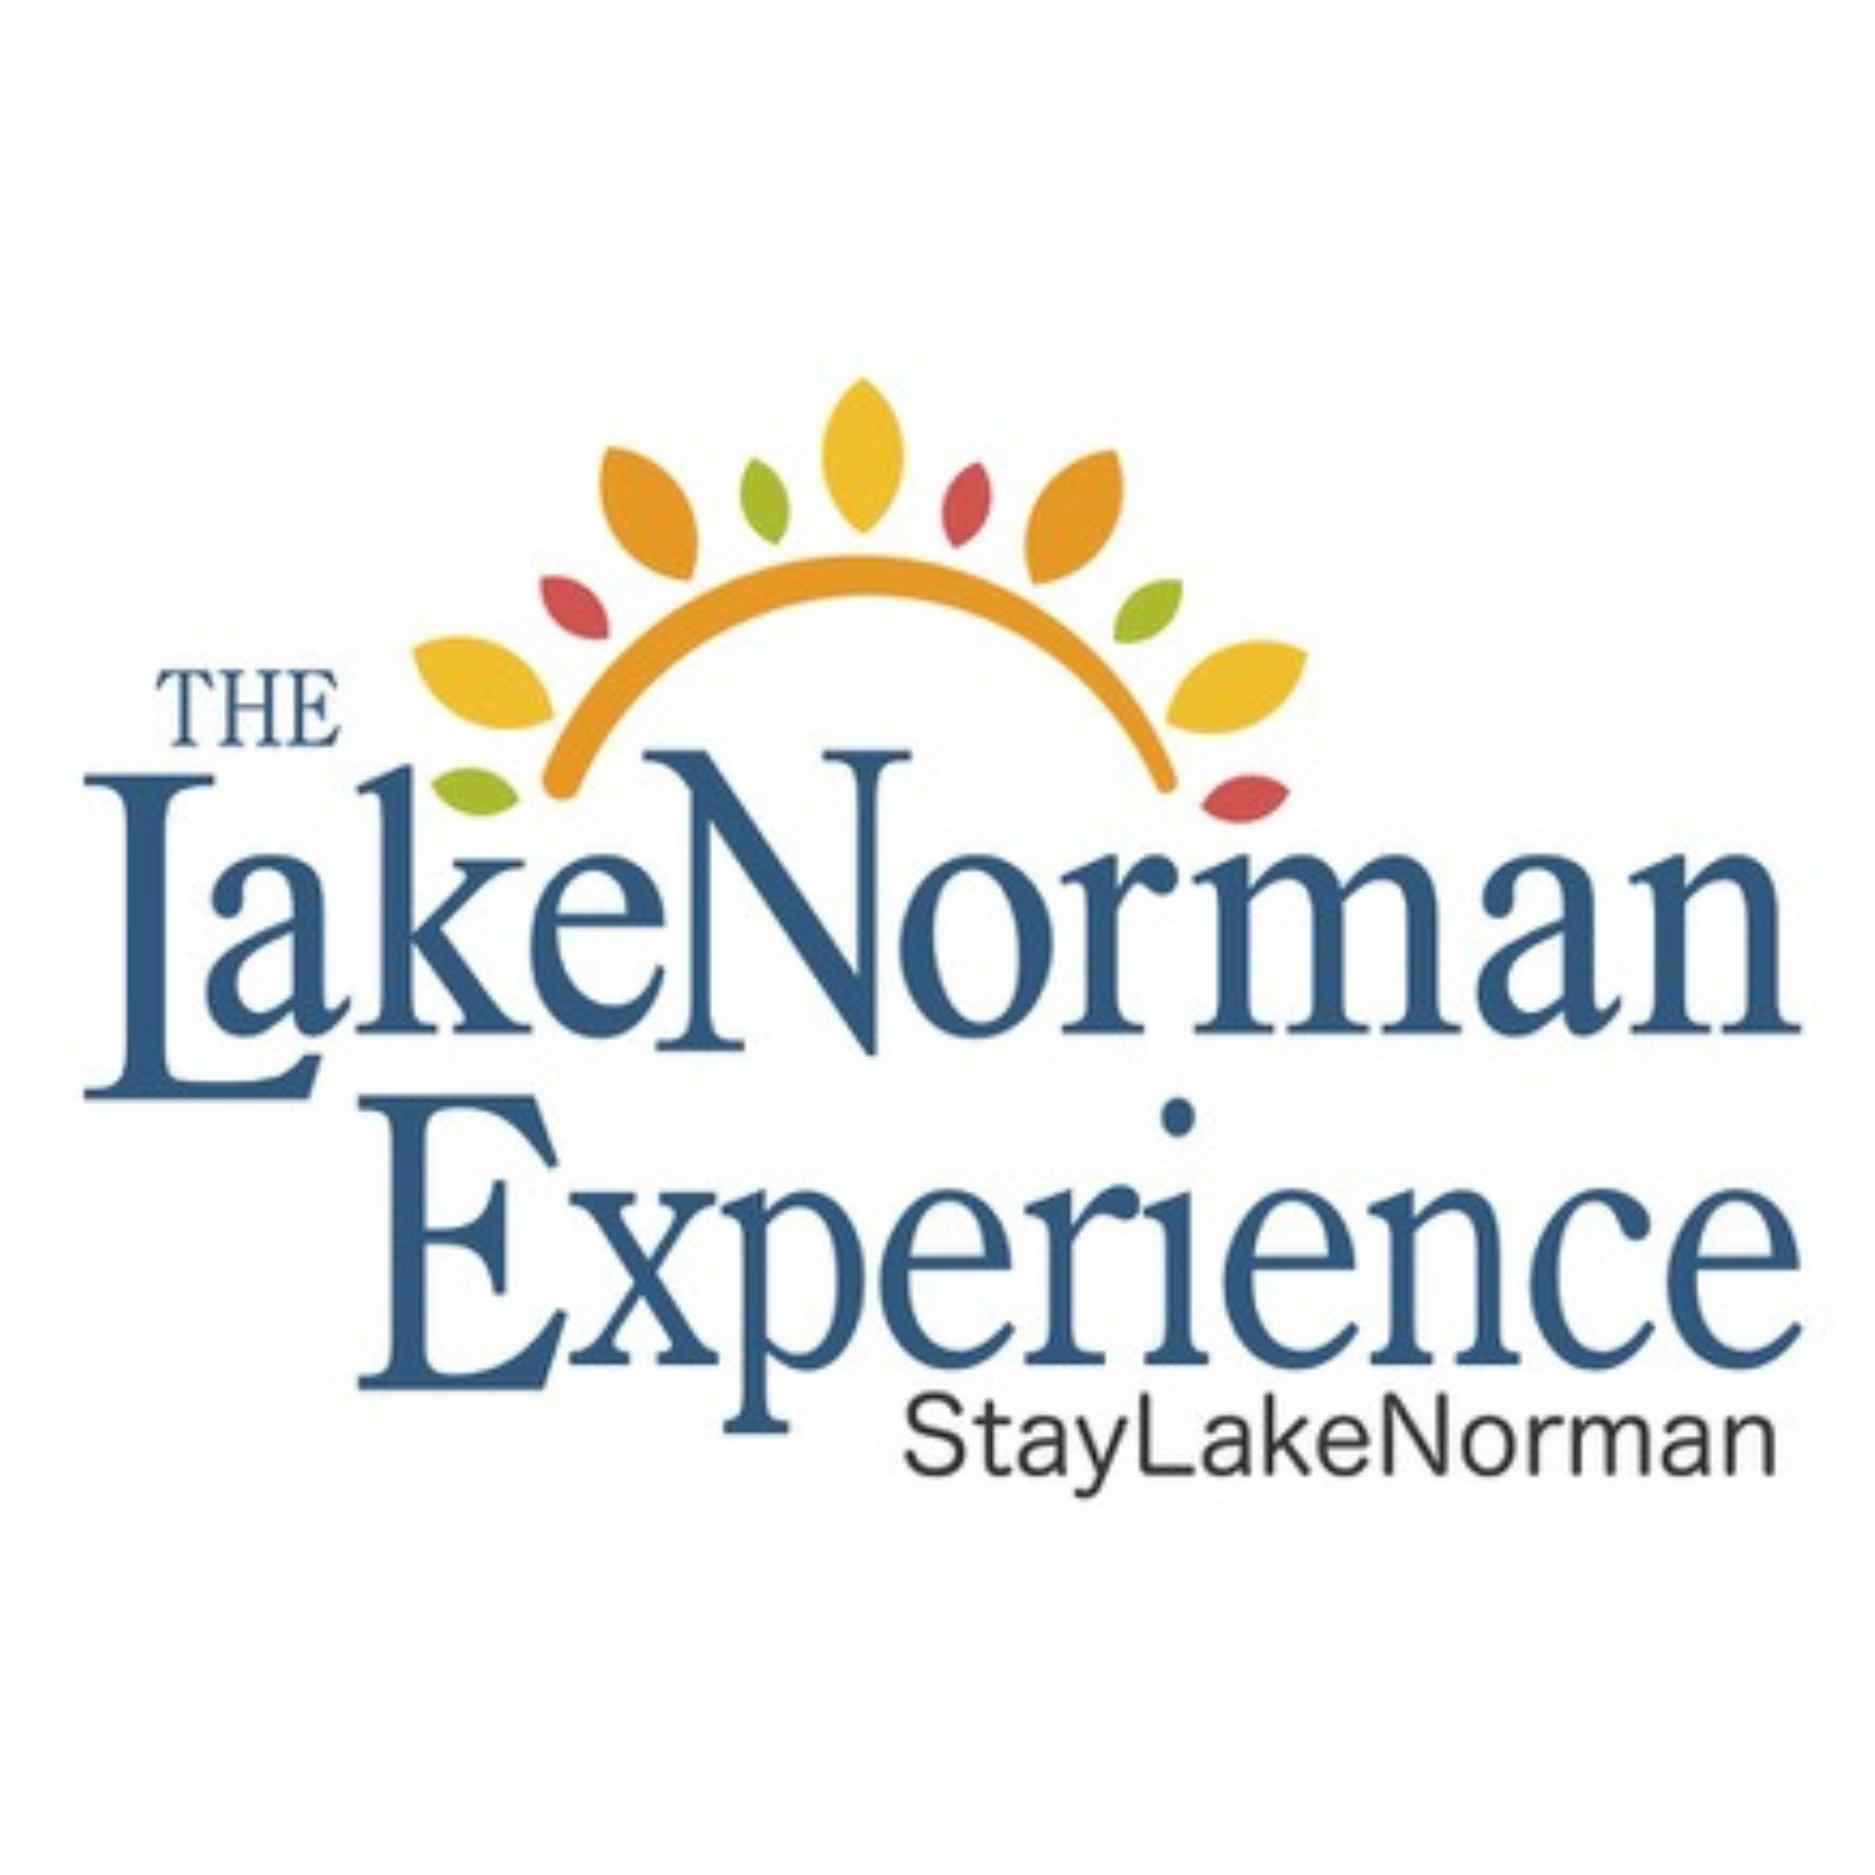 Artwork for The Lake Norman Experience